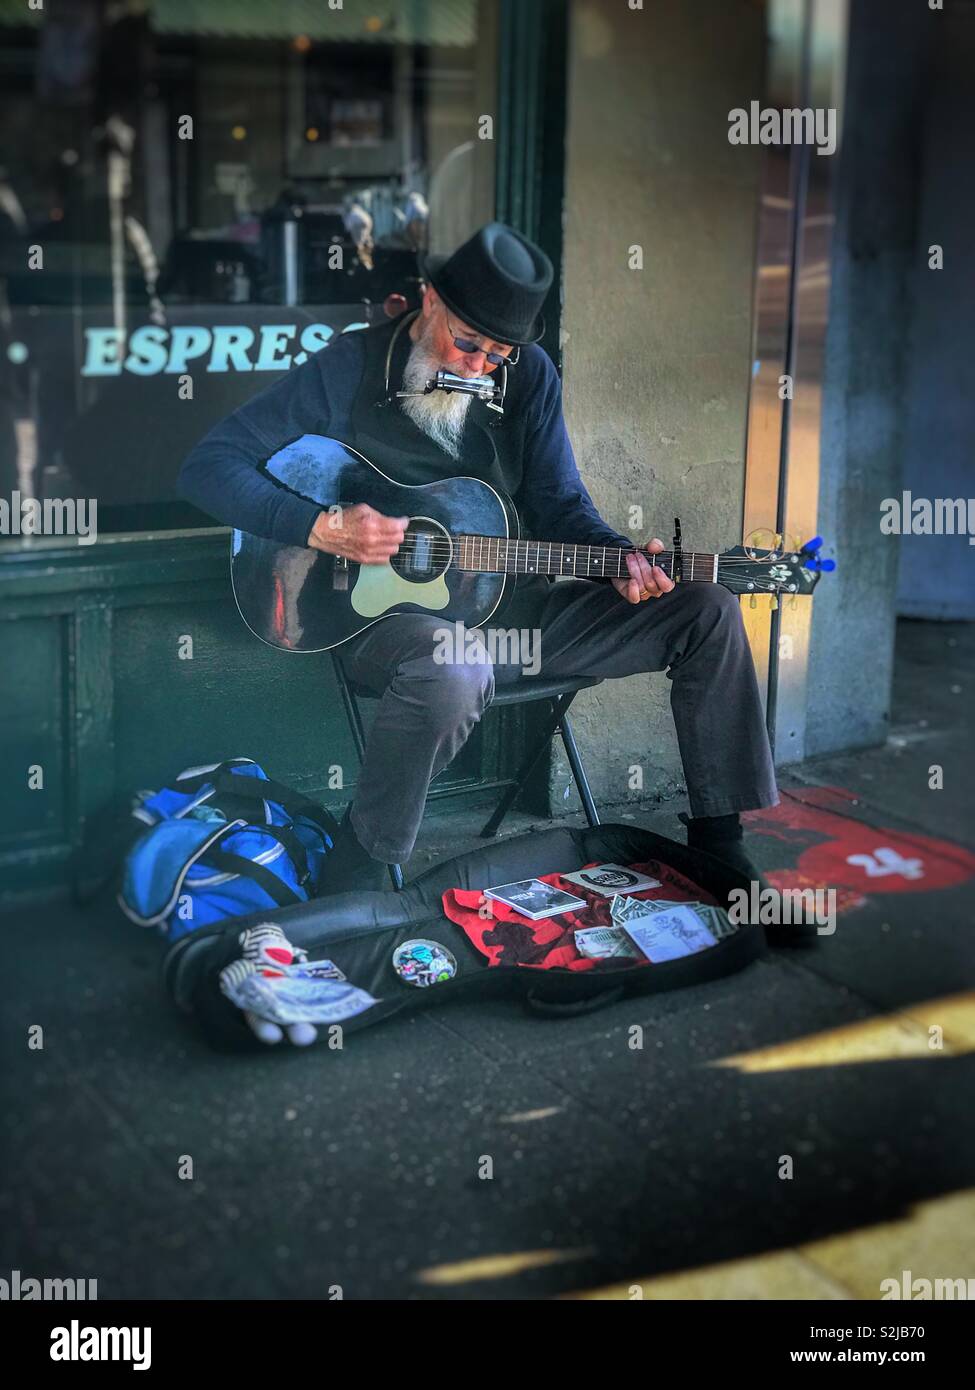 Musician playing in front of a coffee house in Pikes Market, Seattle Washington Stock Photo